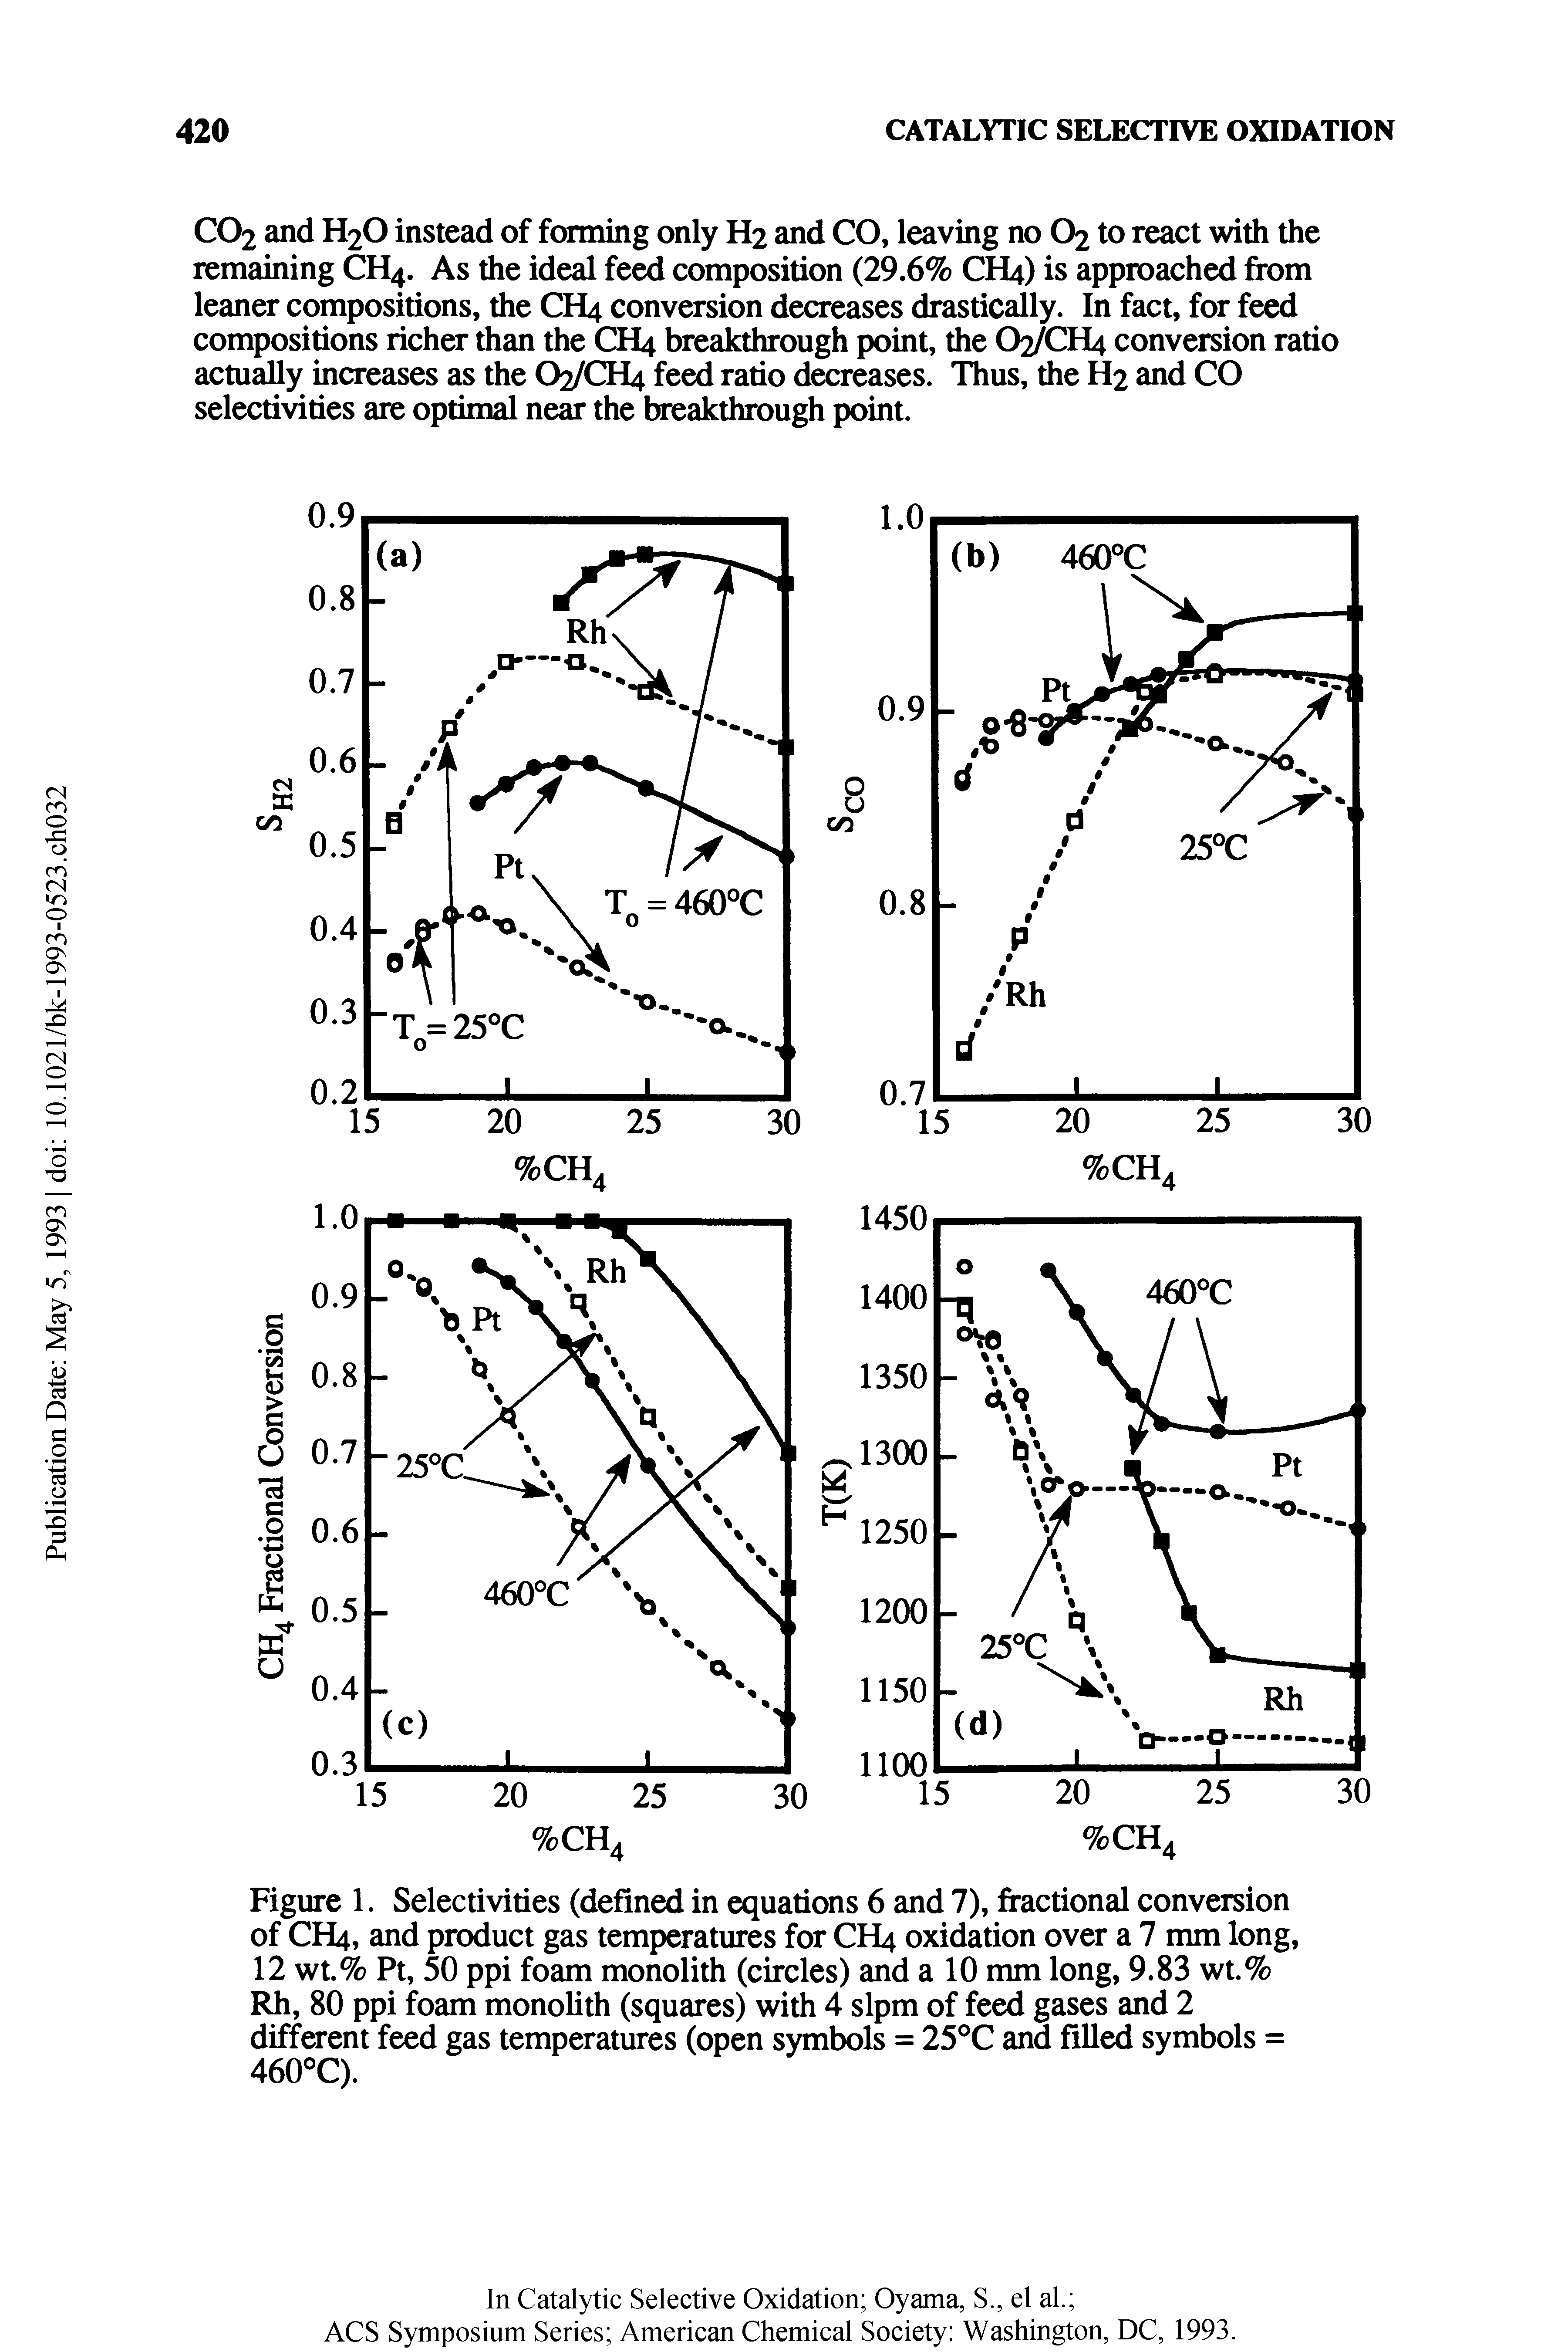 Figure 1. Selectivities (defined in equations 6 and 7), fractional conversion of CH4, and product gas temperatures for CH4 oxidation over a 7 mm long, 12 wt.% Pt, 50 ppi foam monolith (circles) and a 10 mm long, 9.83 wt.% Rh, 80 ppi foam monolith (squares) with 4 slpm of feed gases and 2 different feed gas temperatures (open symbols = 25°C and filled symbols = 460°C).